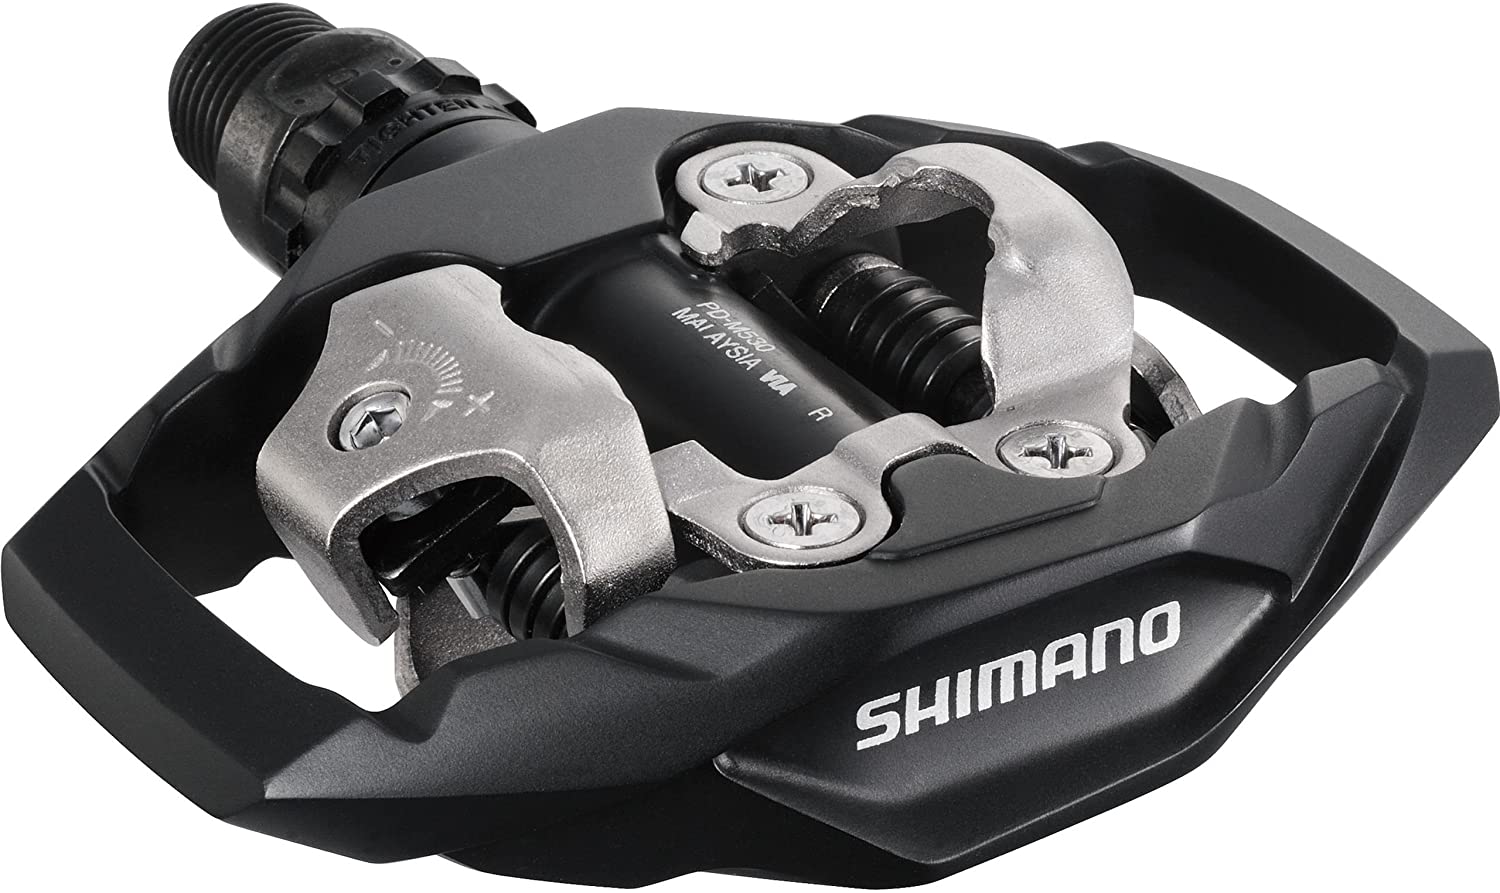 The SHIMANO PD-M530 Mountain Pedals